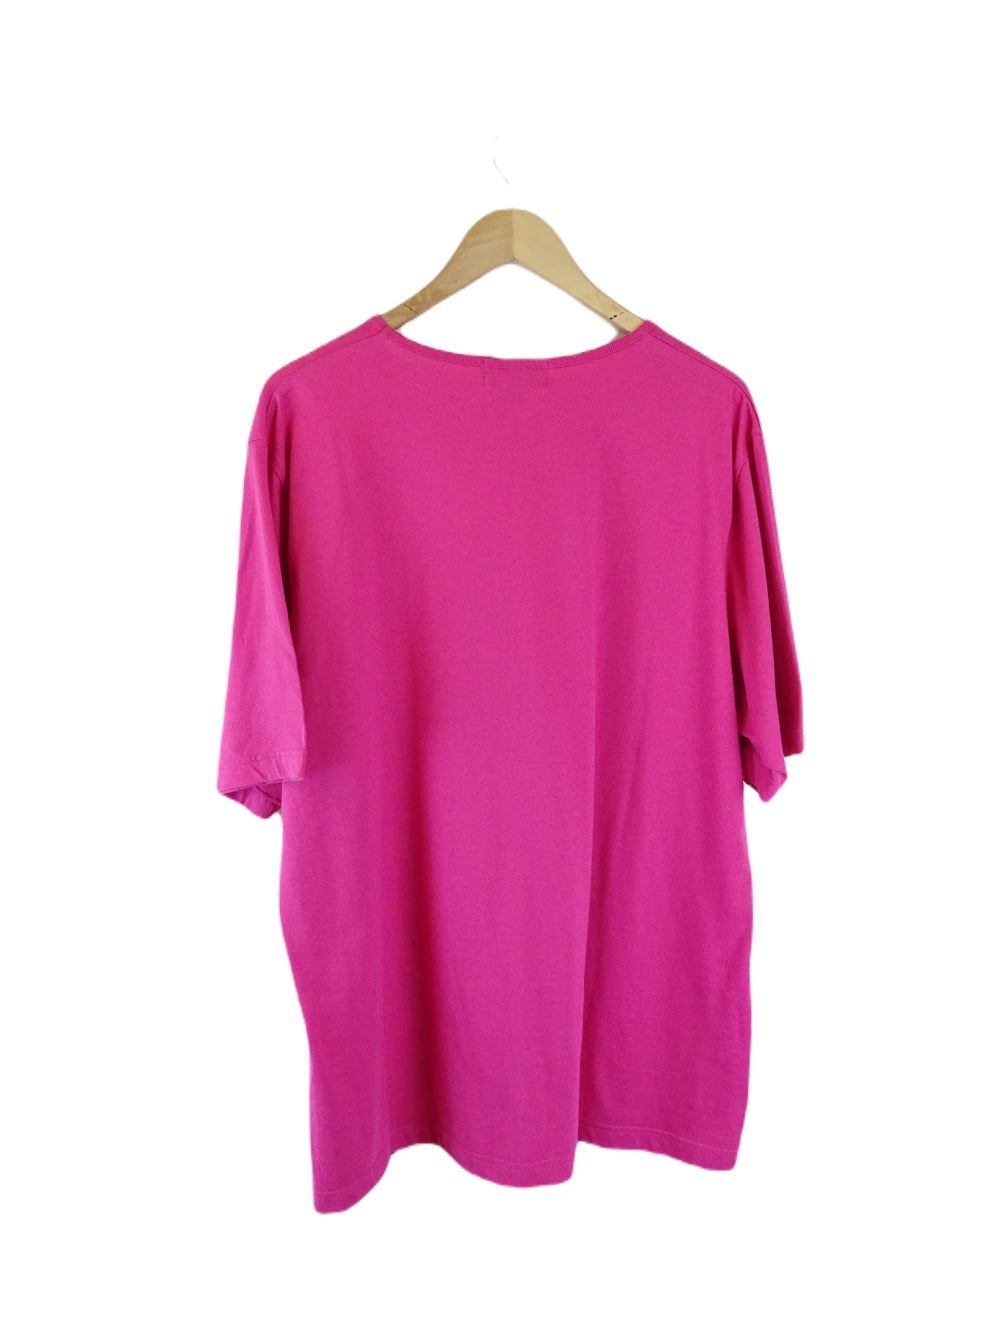 My Size Pink Top M